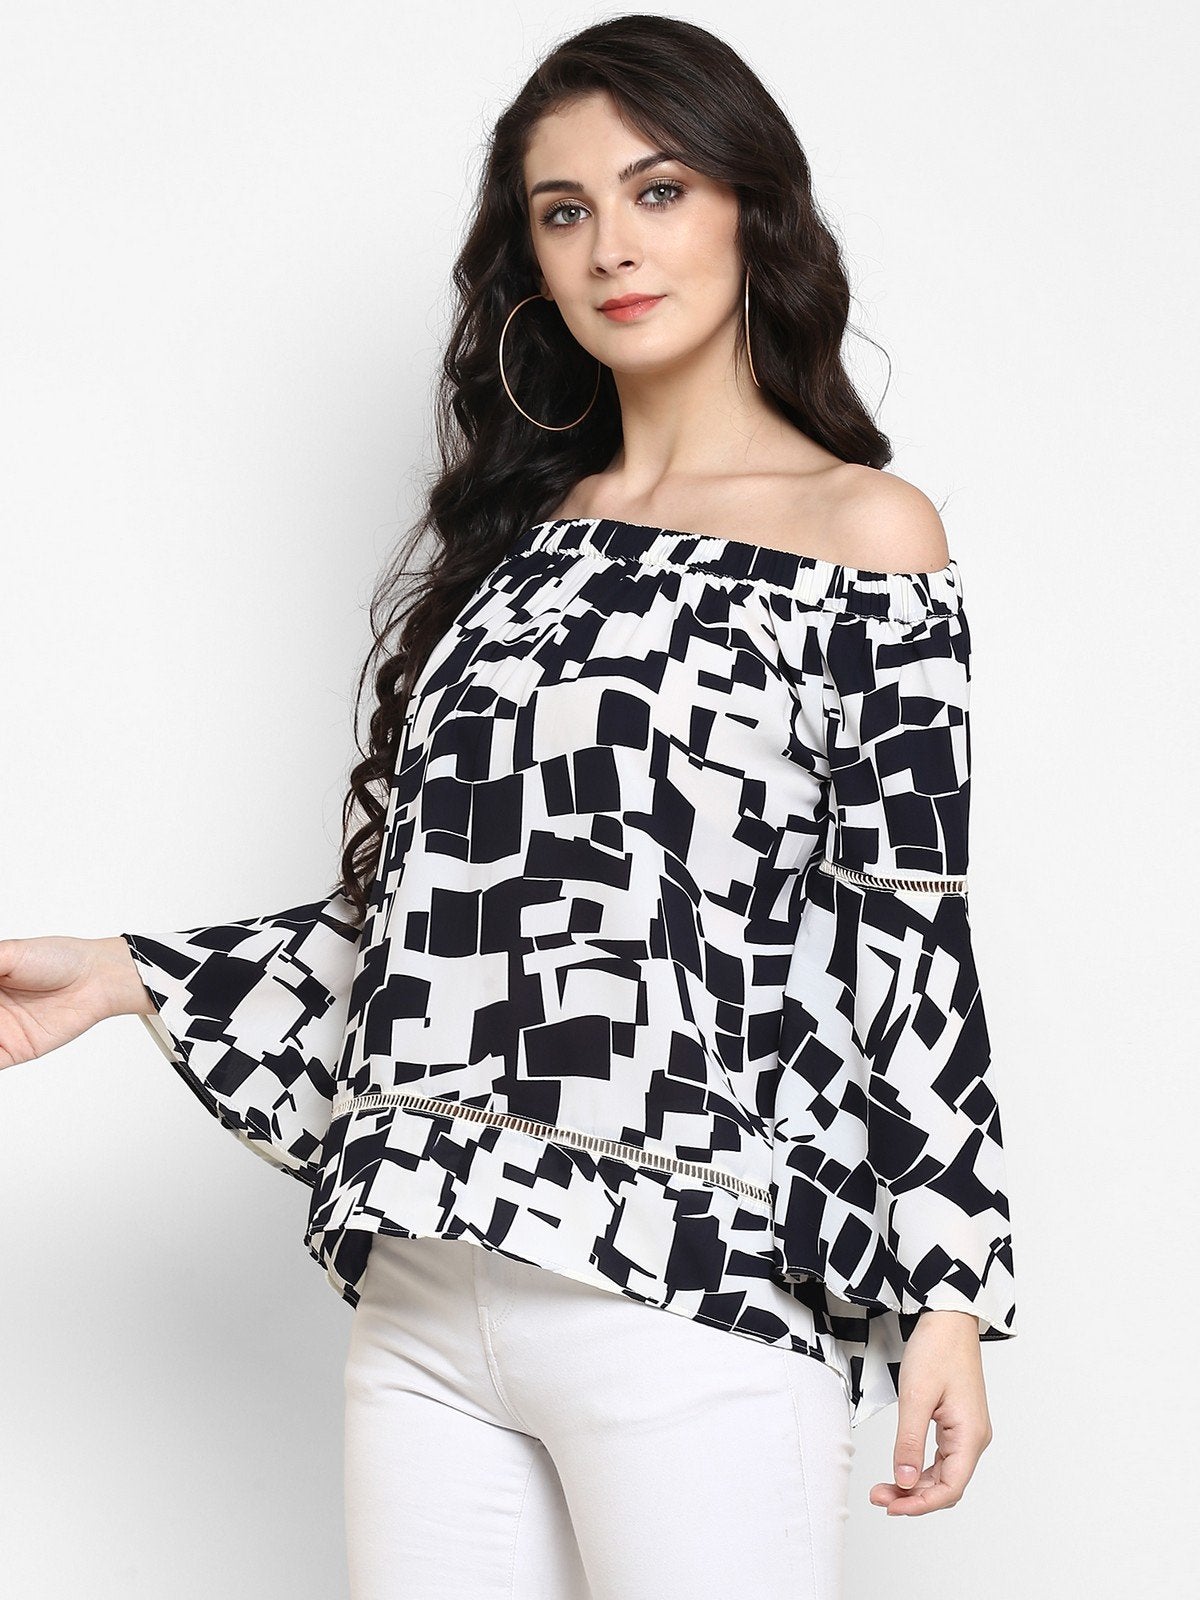 Women's Abstract Print Off-Shoulder Top - Pannkh